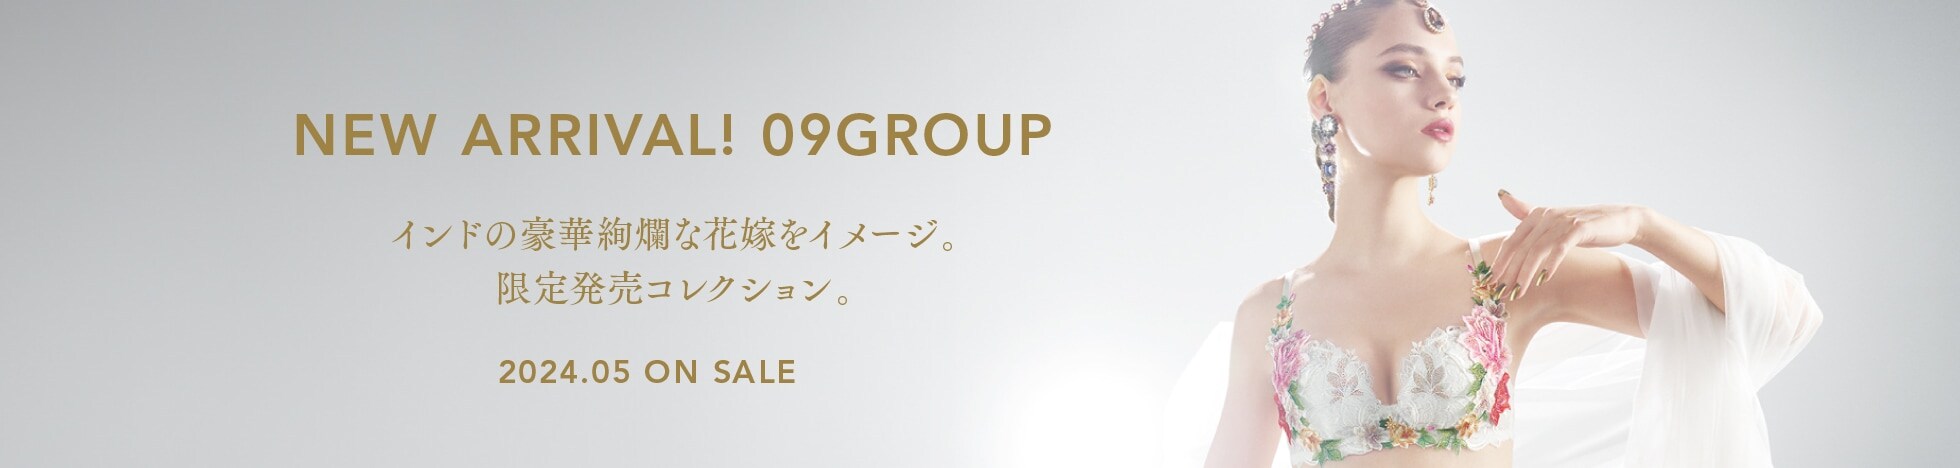 NEW ARRIVAL 06GROUP